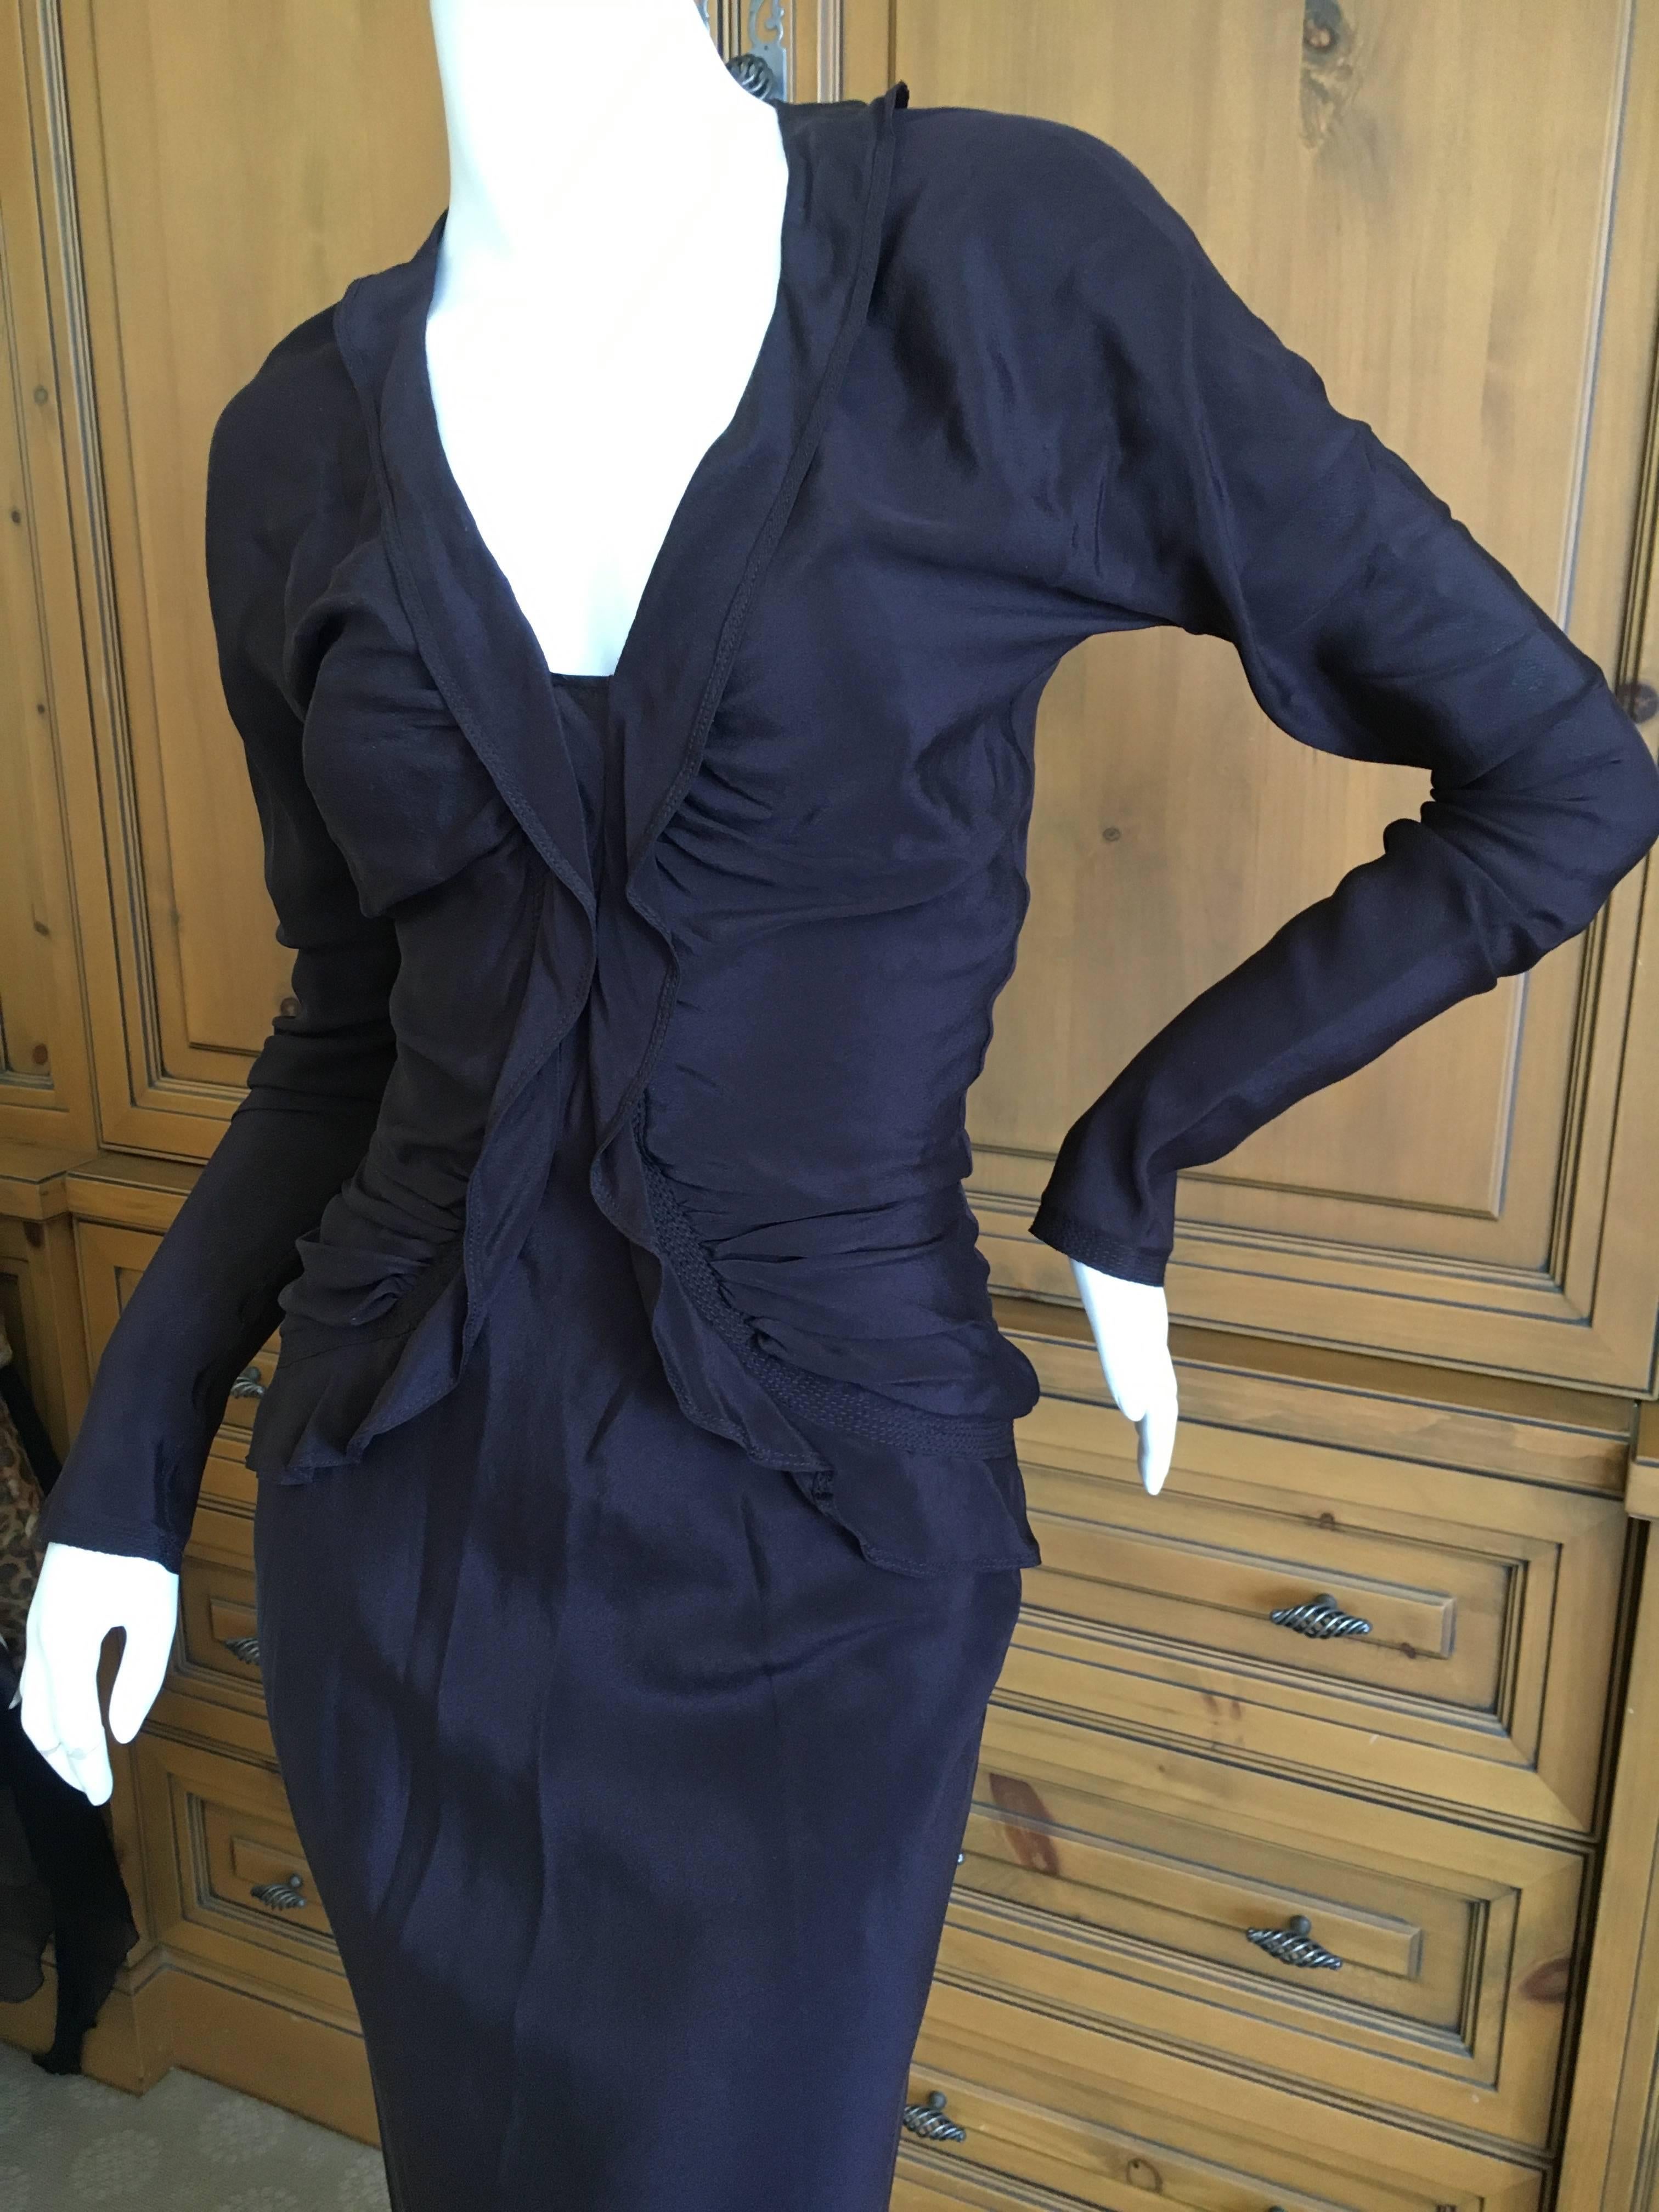 Yves Saint Laurent by Tom Ford Little Black Dress with Ruffle Details For Sale 1